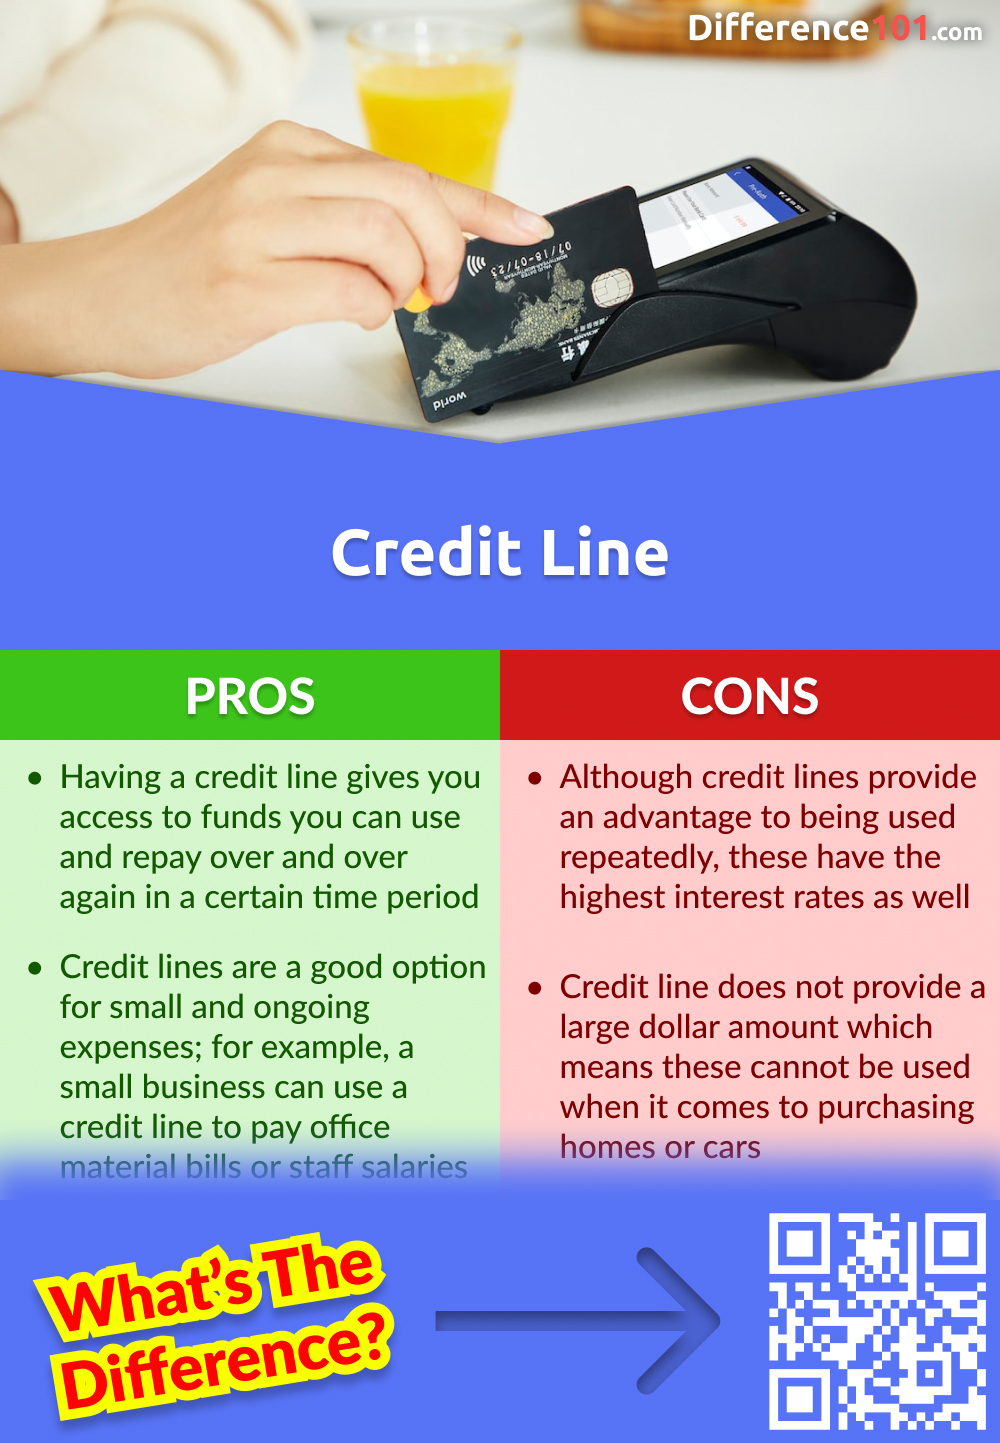 Credit Line Pros and Cons
